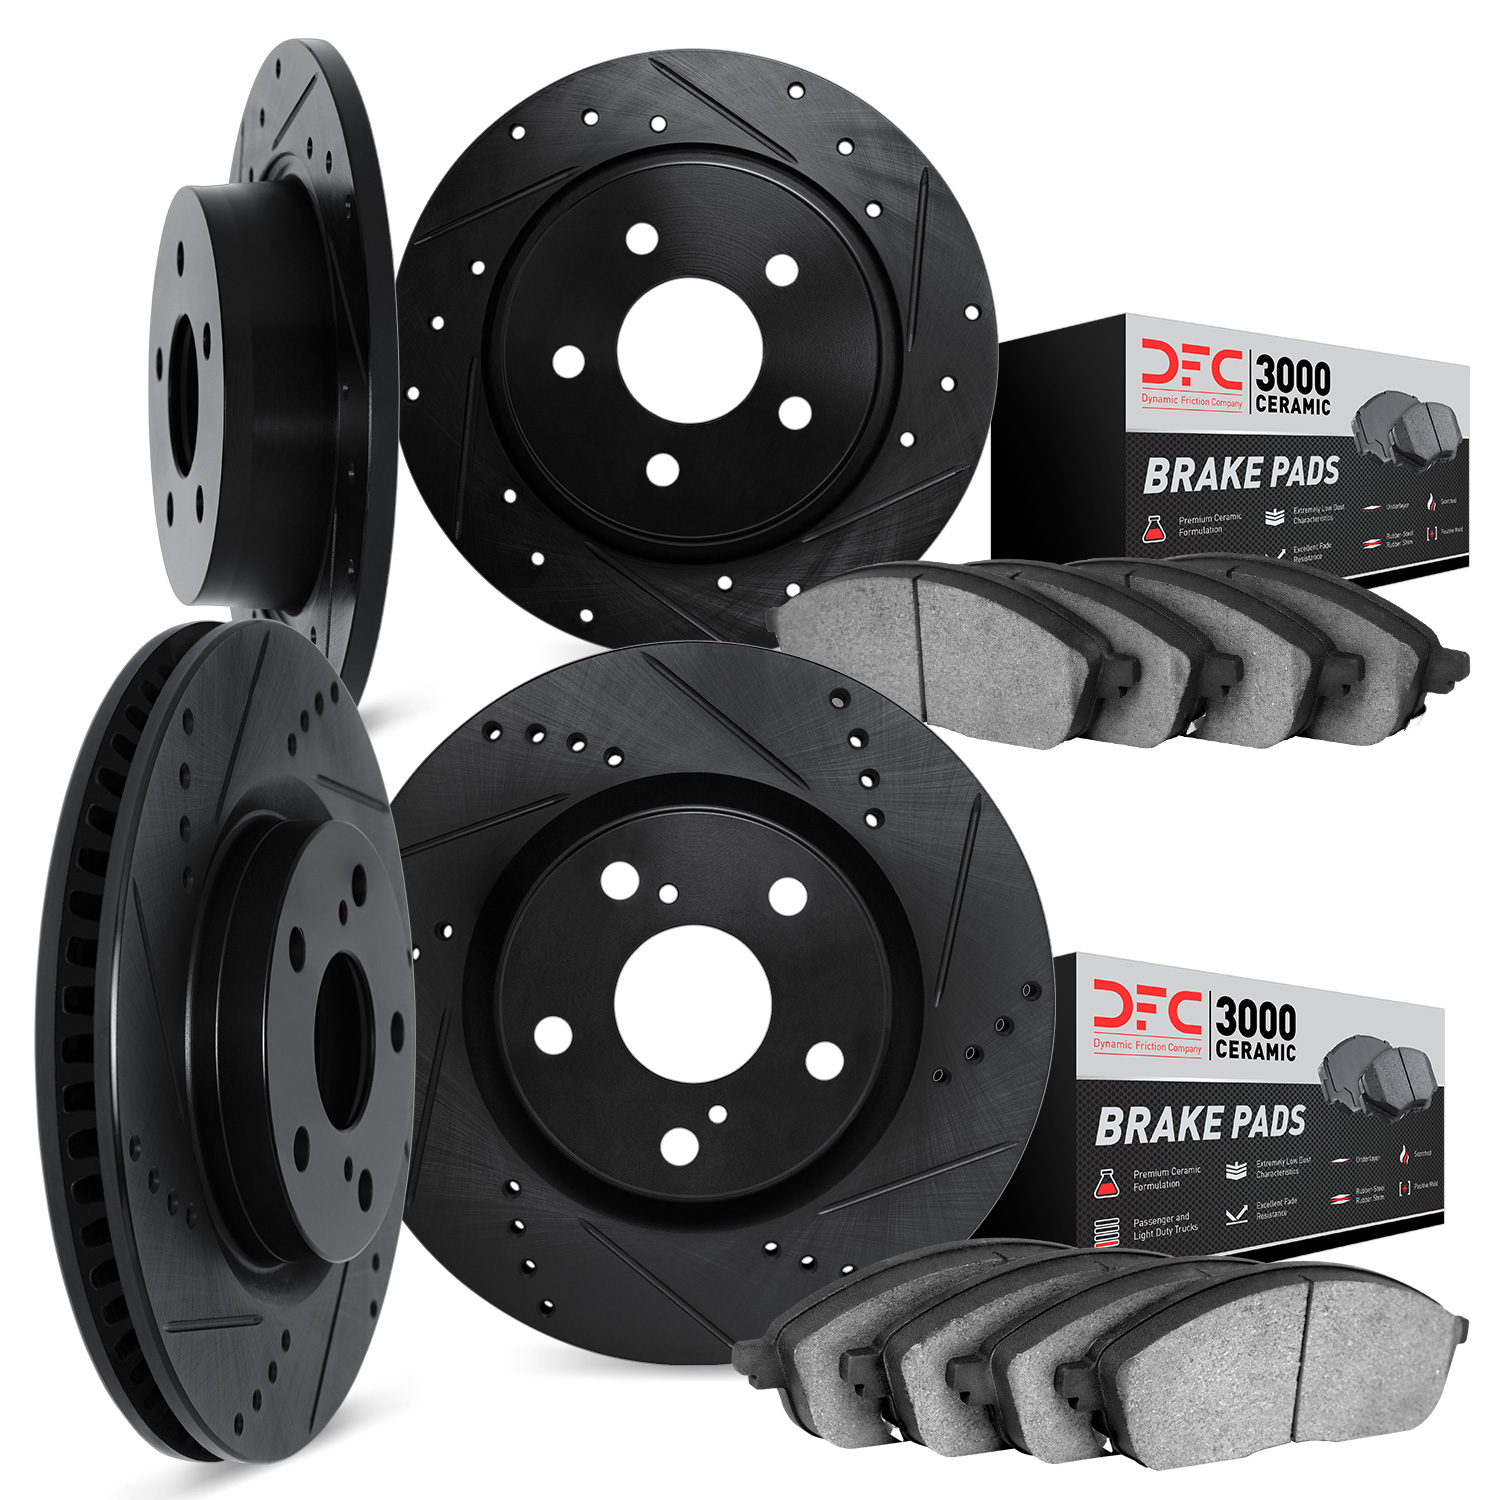 8304-59086 Drilled/Slotted Brake Rotors with 3000-Series Ceramic Brake Pads Kit [Black], Fits Select Acura/Honda, Position: Fron